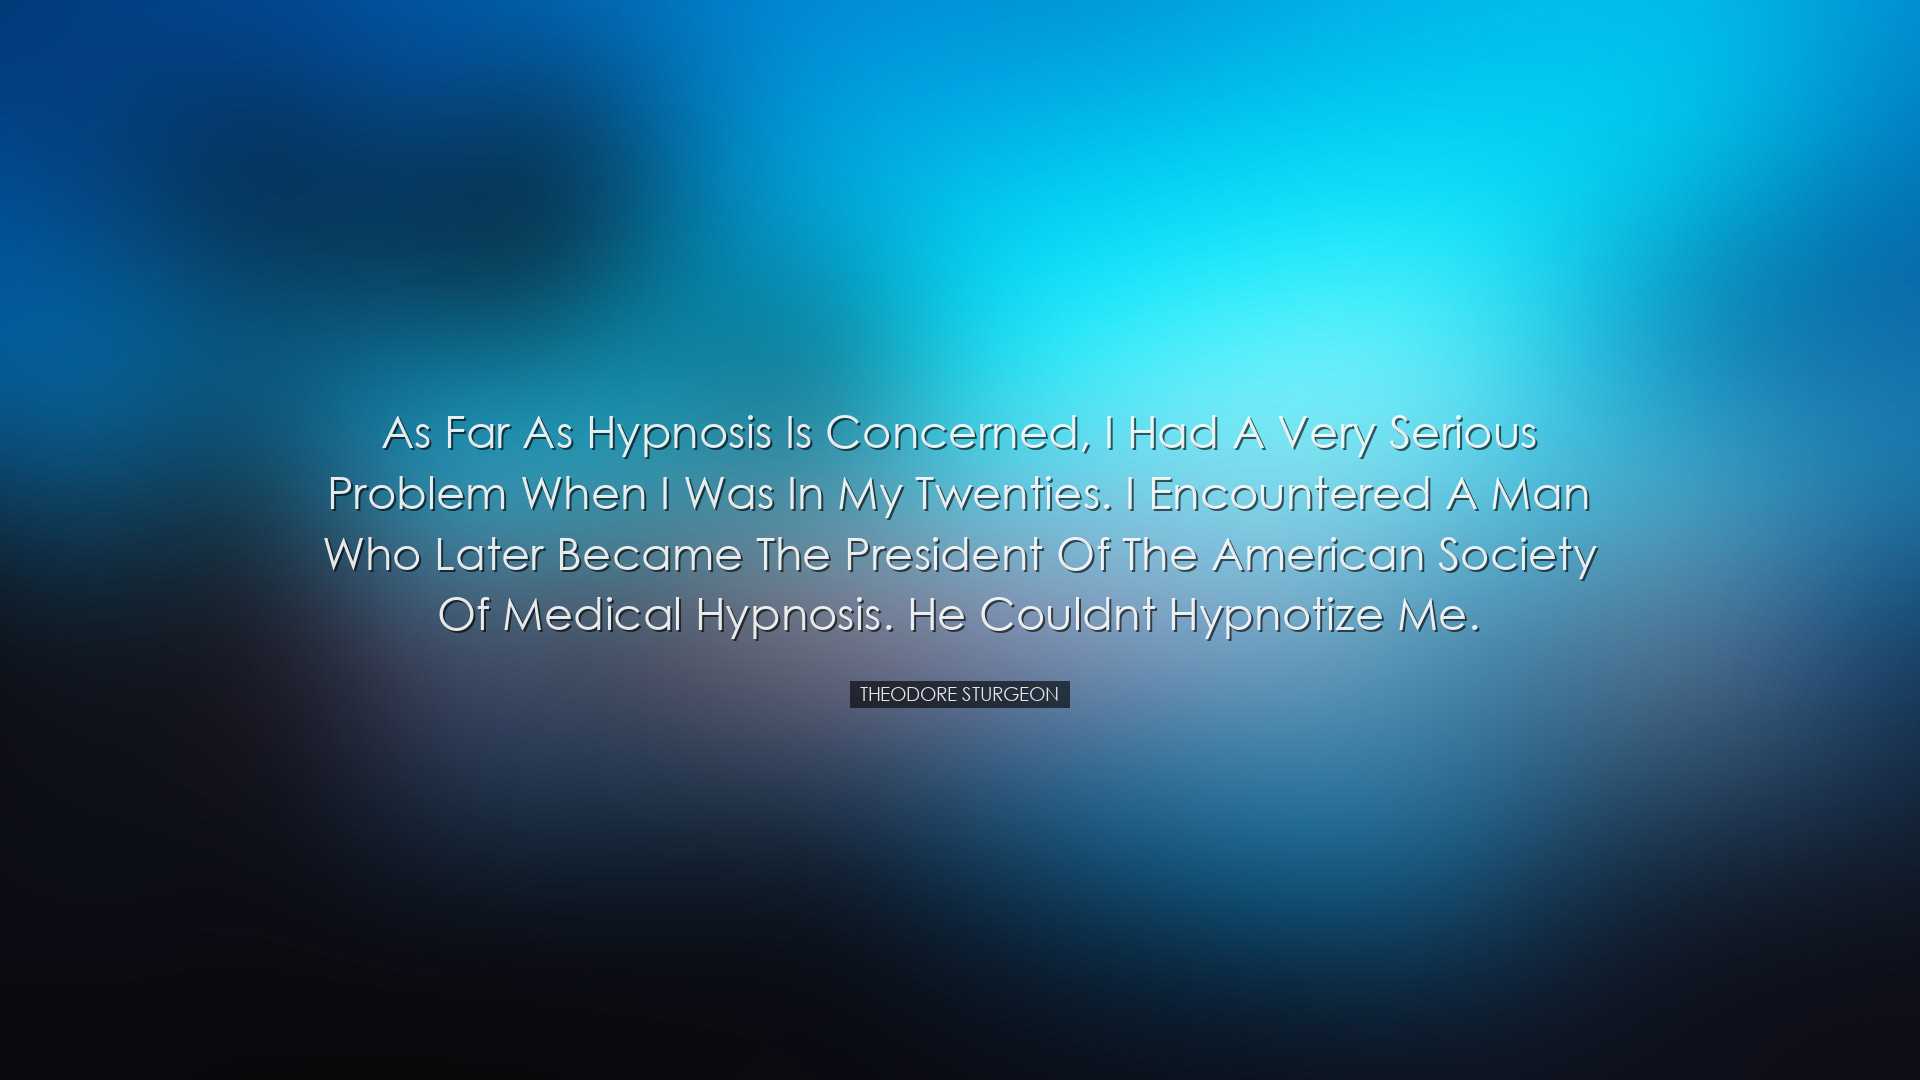 As far as hypnosis is concerned, I had a very serious problem when